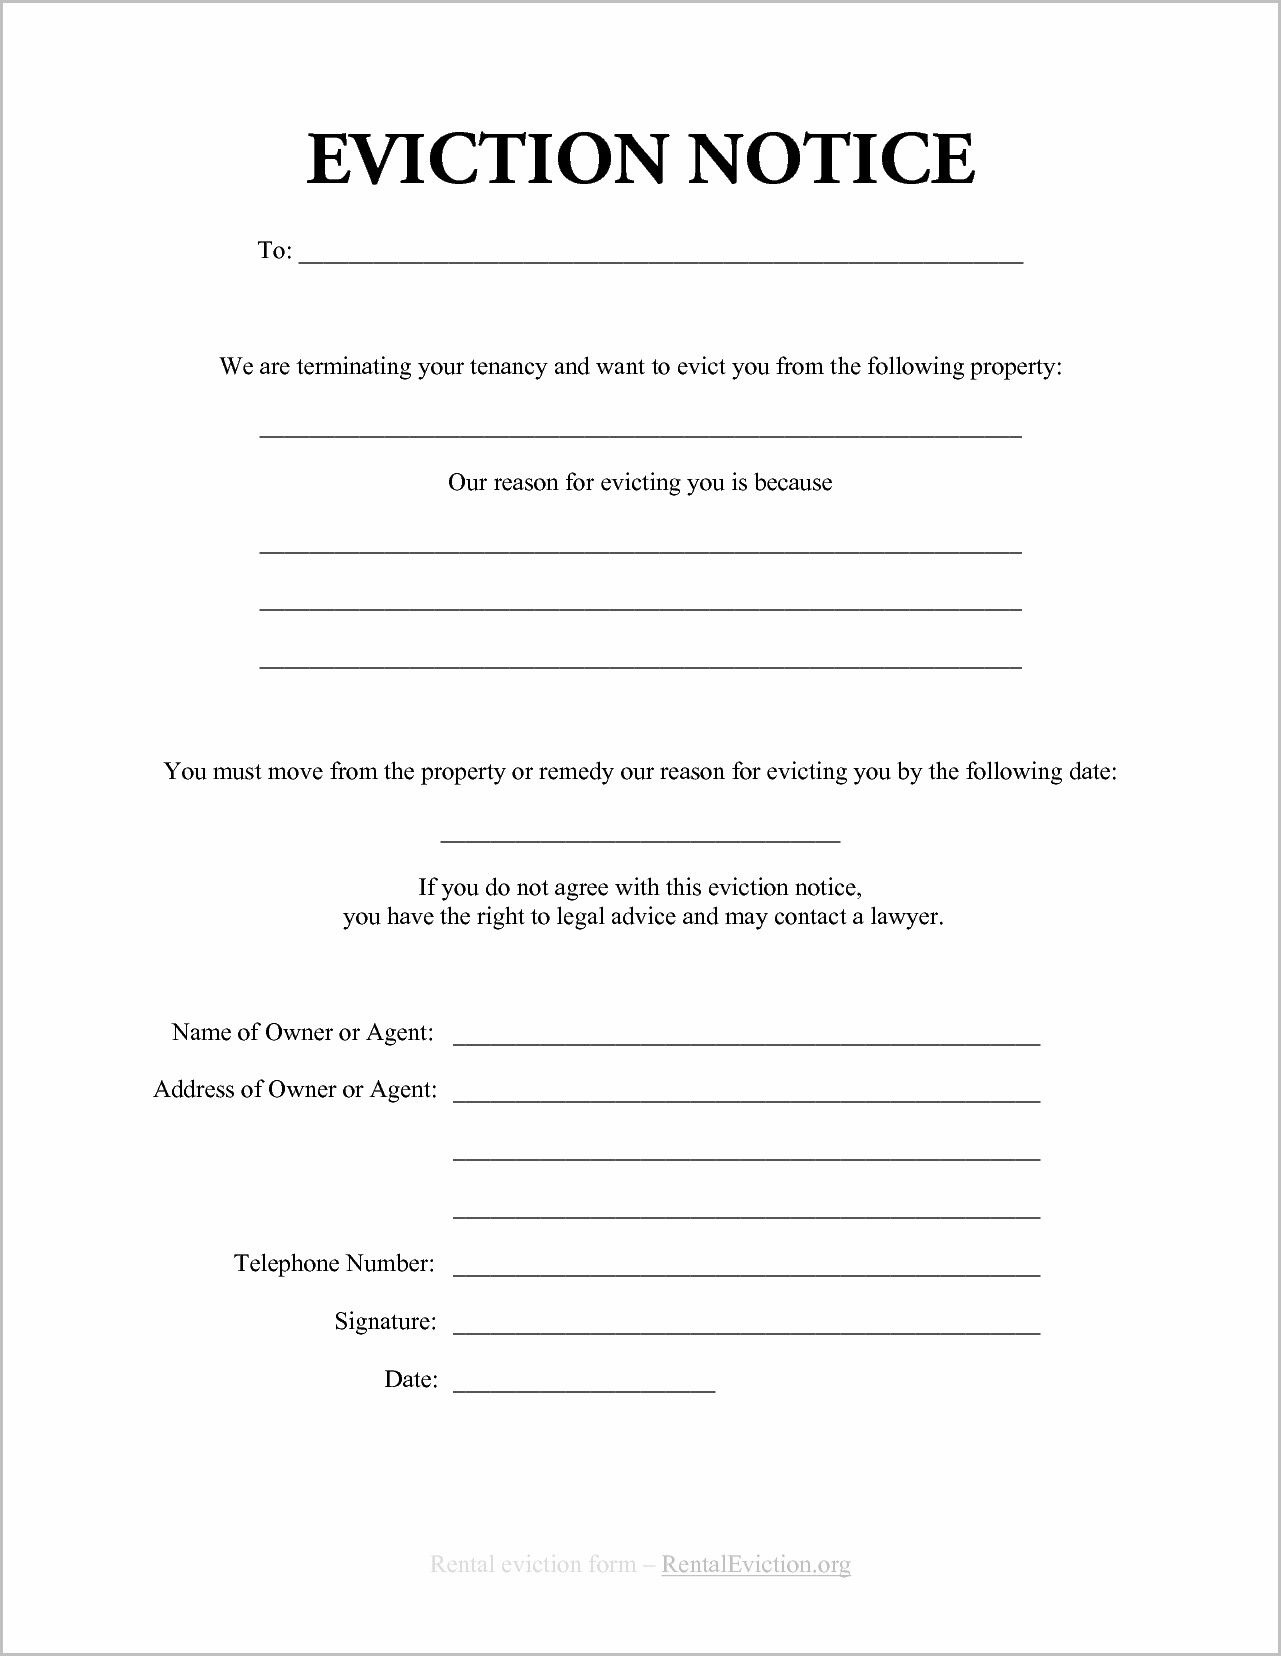 Notice Of Eviction Form Ontario | Forms | Eviction Notice, Resume - Free Printable Eviction Notice Ohio